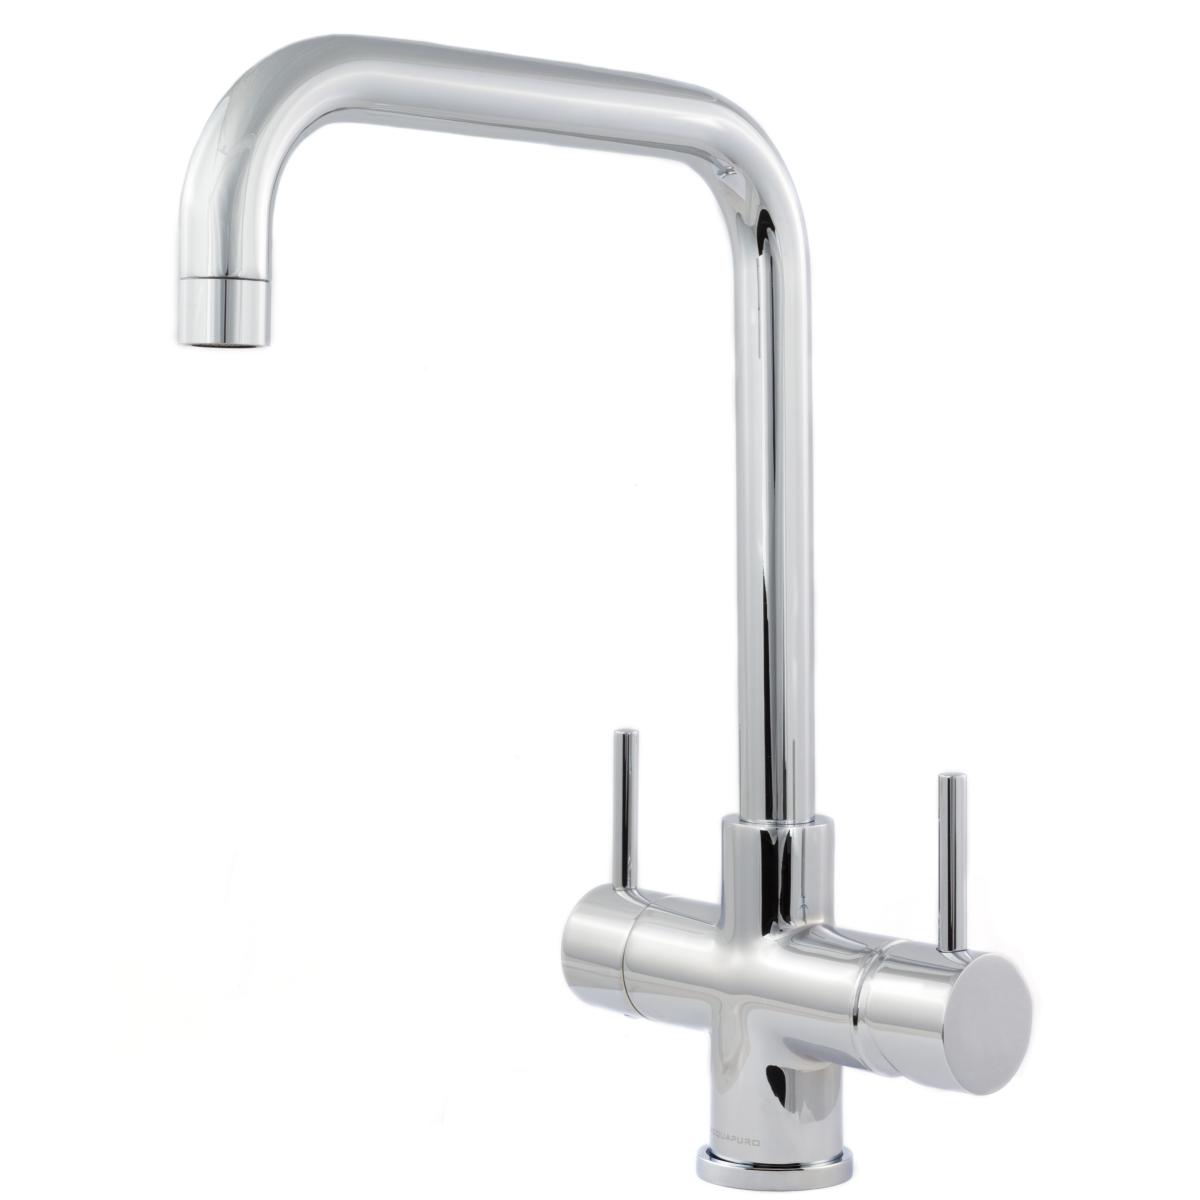 Monza 2 Lever Chrome Kitchen Tap &Doulton Ecofast Drinking Water Filter System